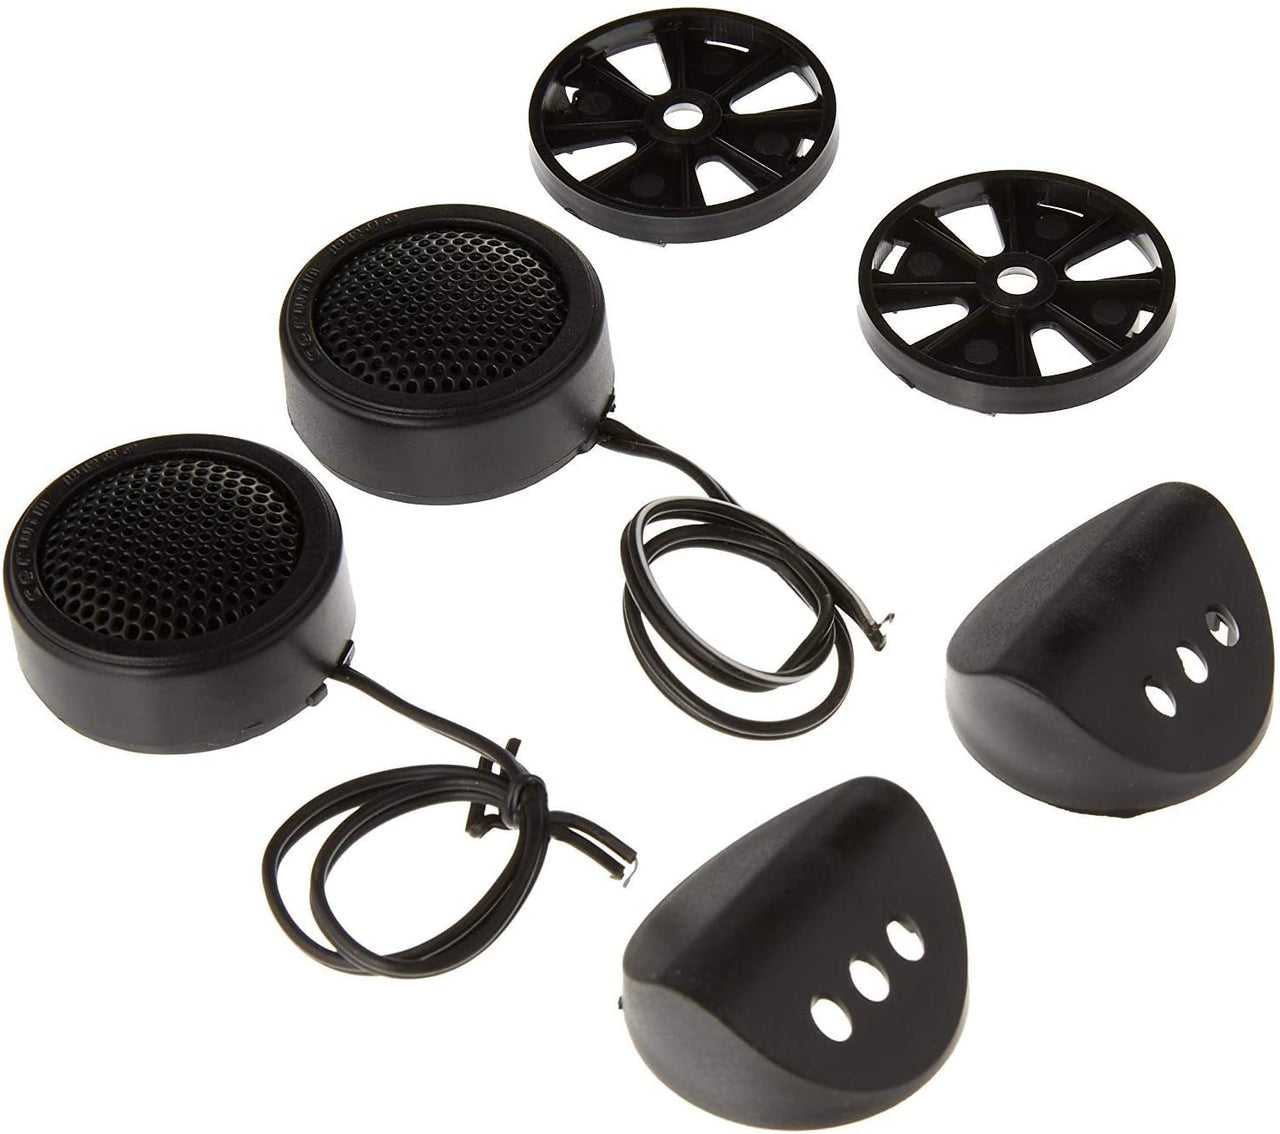 Absolute TW600 Mini Car Tweeter Kit 600 Watts of Power, High-Frequency Silk Dome Tweeters, 1.5" High Fidelity, Efficiency and Performance Audio System 4 ohm, Dual Mounting, Surface or Angle